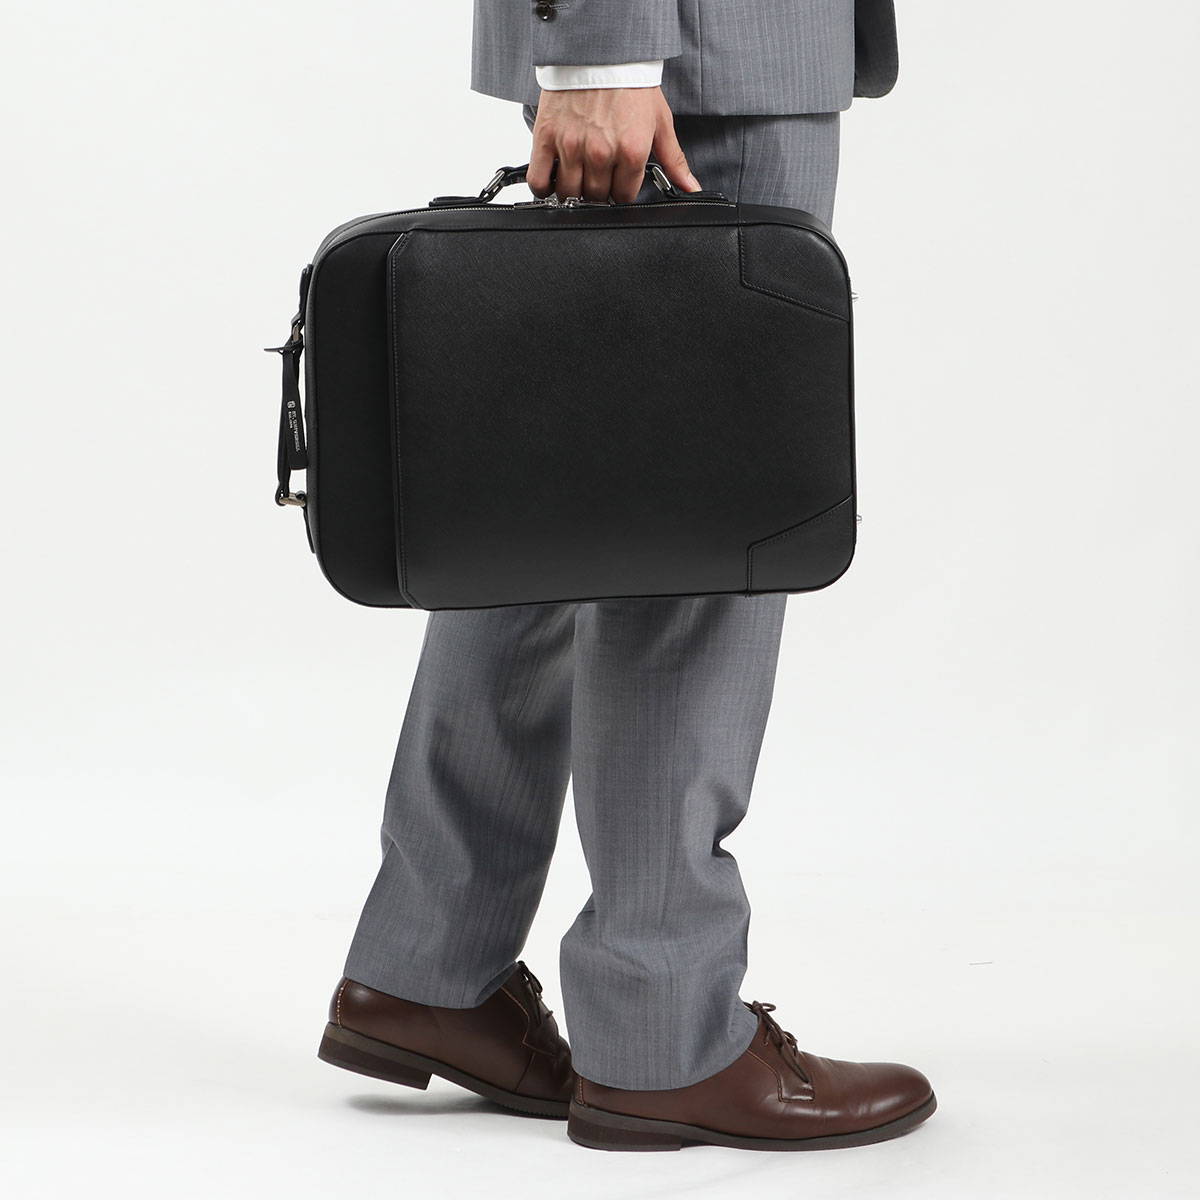 ST.UNIVERSEL セントユニバーセル SAFFIANO BUSINESS BACKPACK 